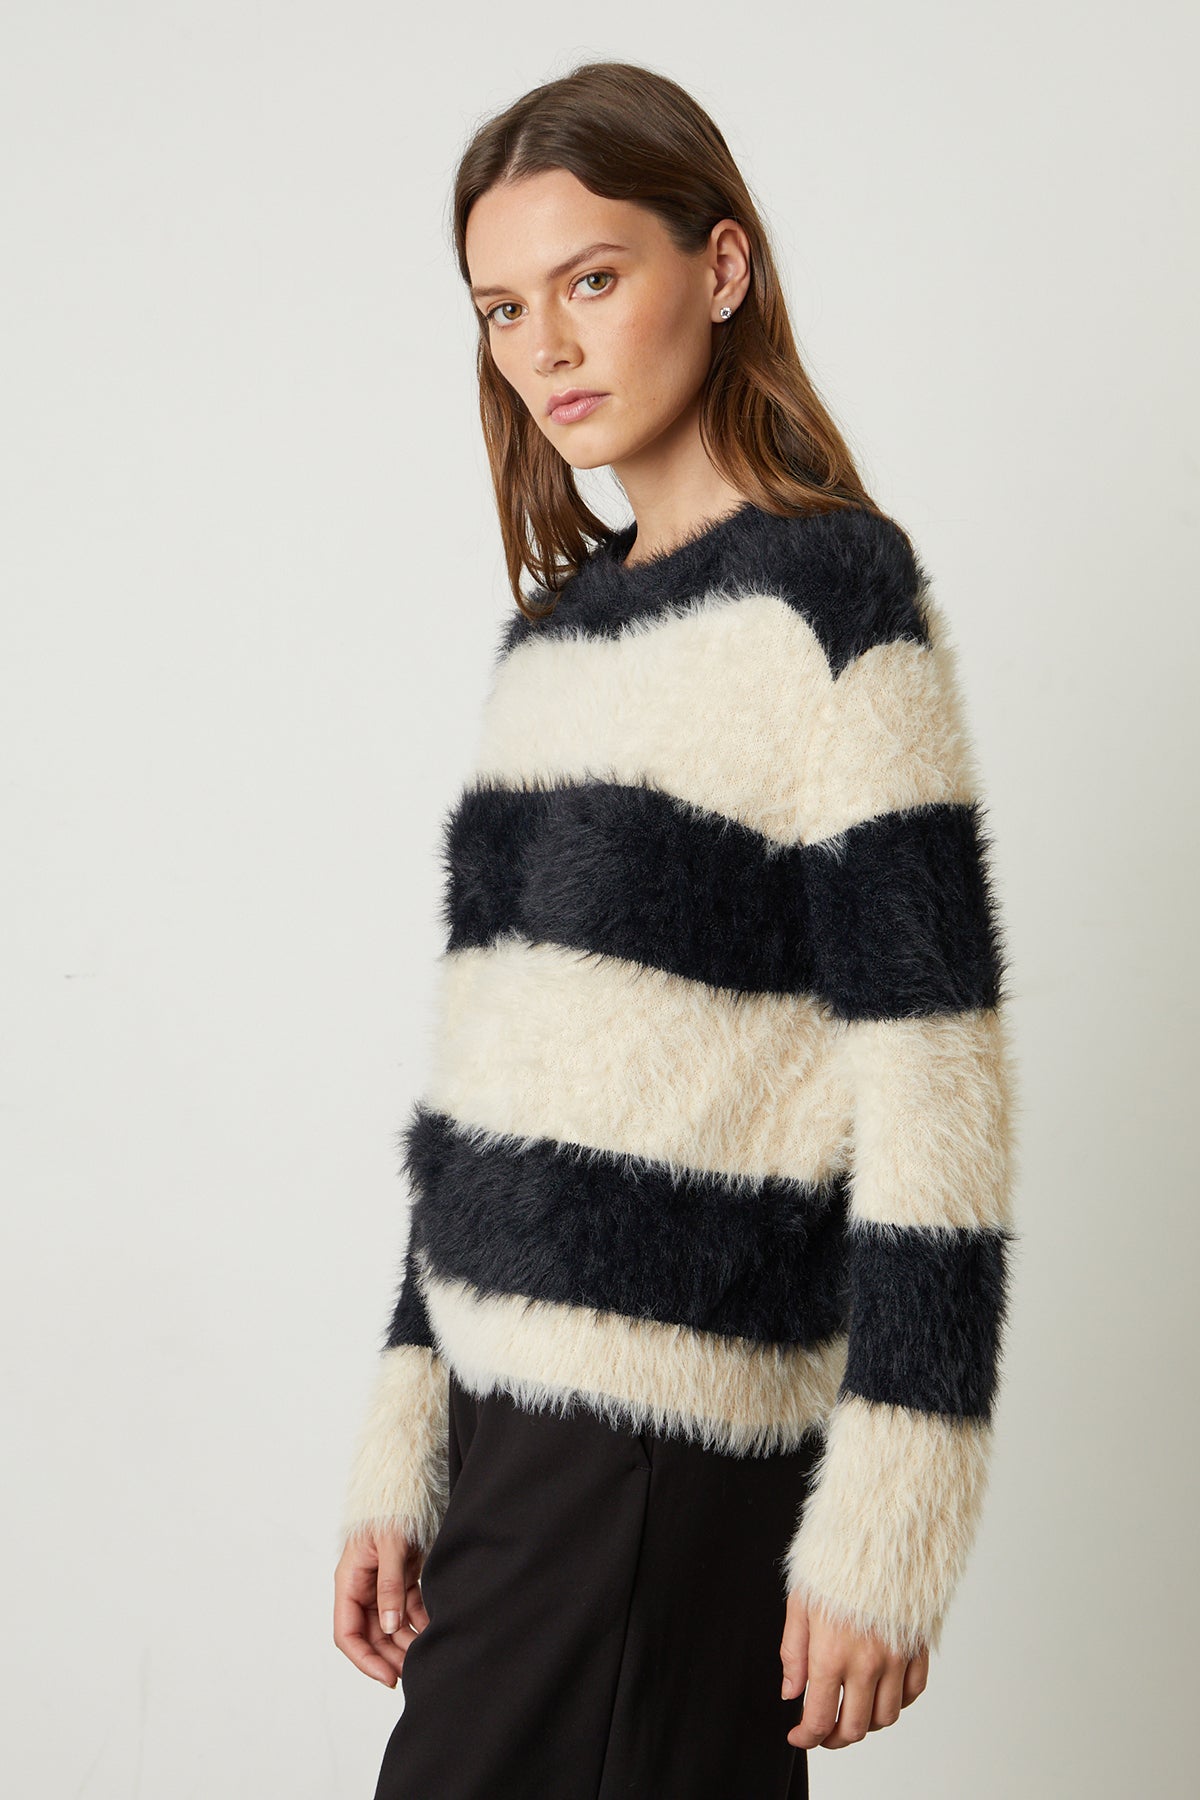 Gianna Feather Yarn Crew Neck Sweater with broad black and milk stripes side-25669133435073